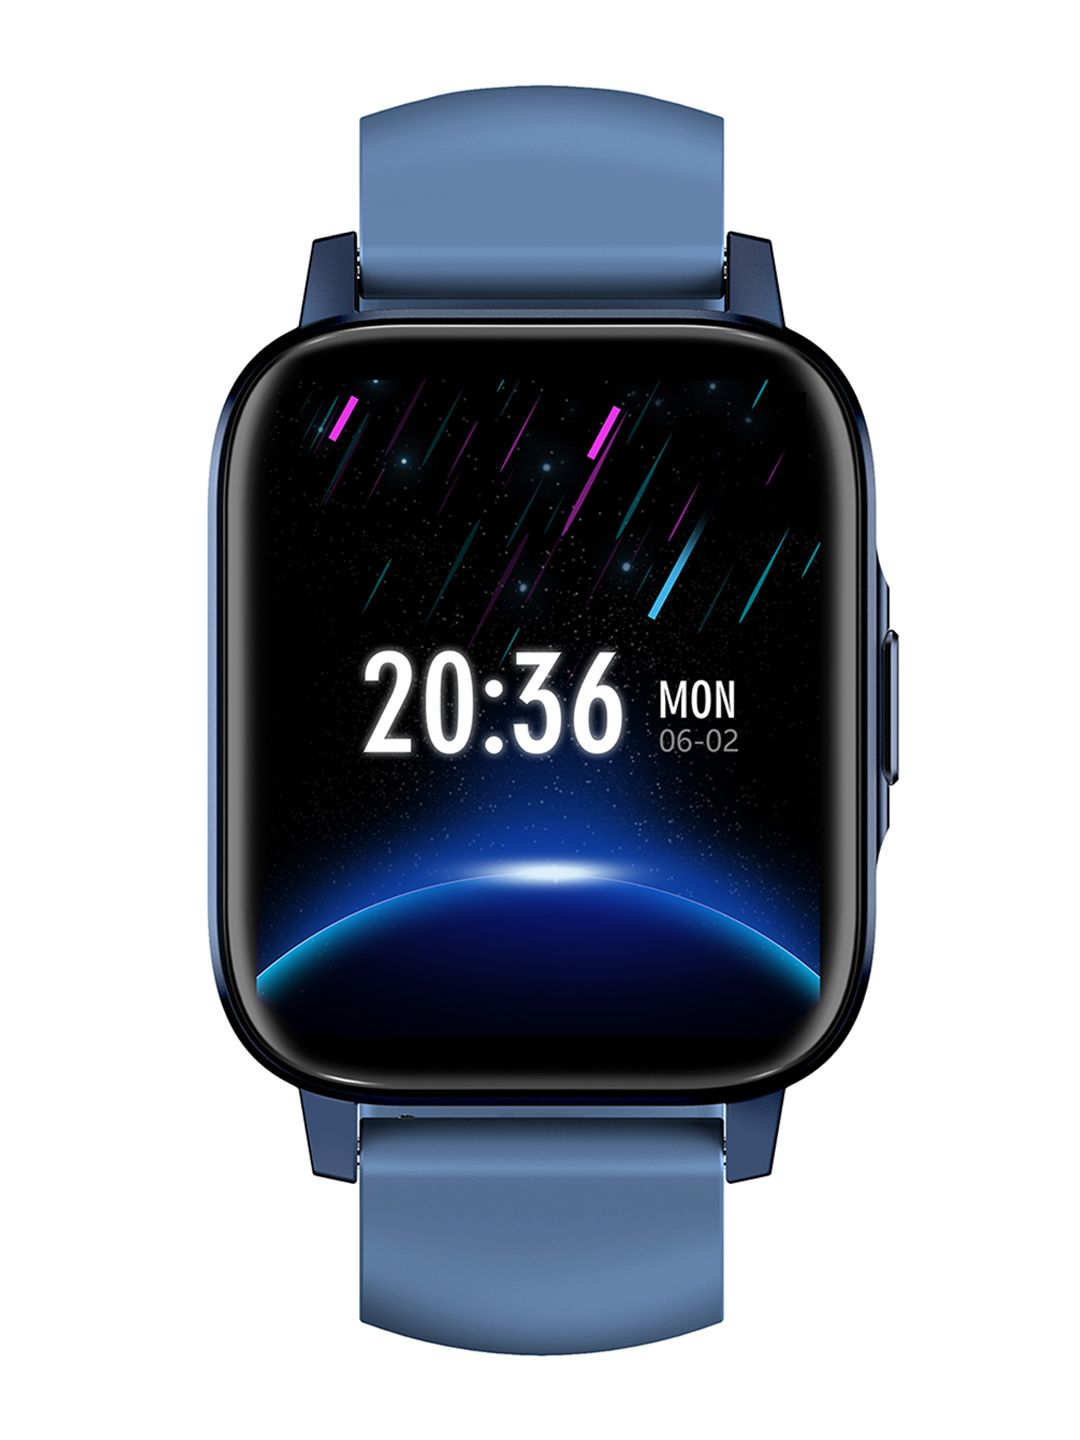 Cellecor Blue Solid ActFit A1 Pro SpO2 IP68 Waterproof Smartwatch Price in India